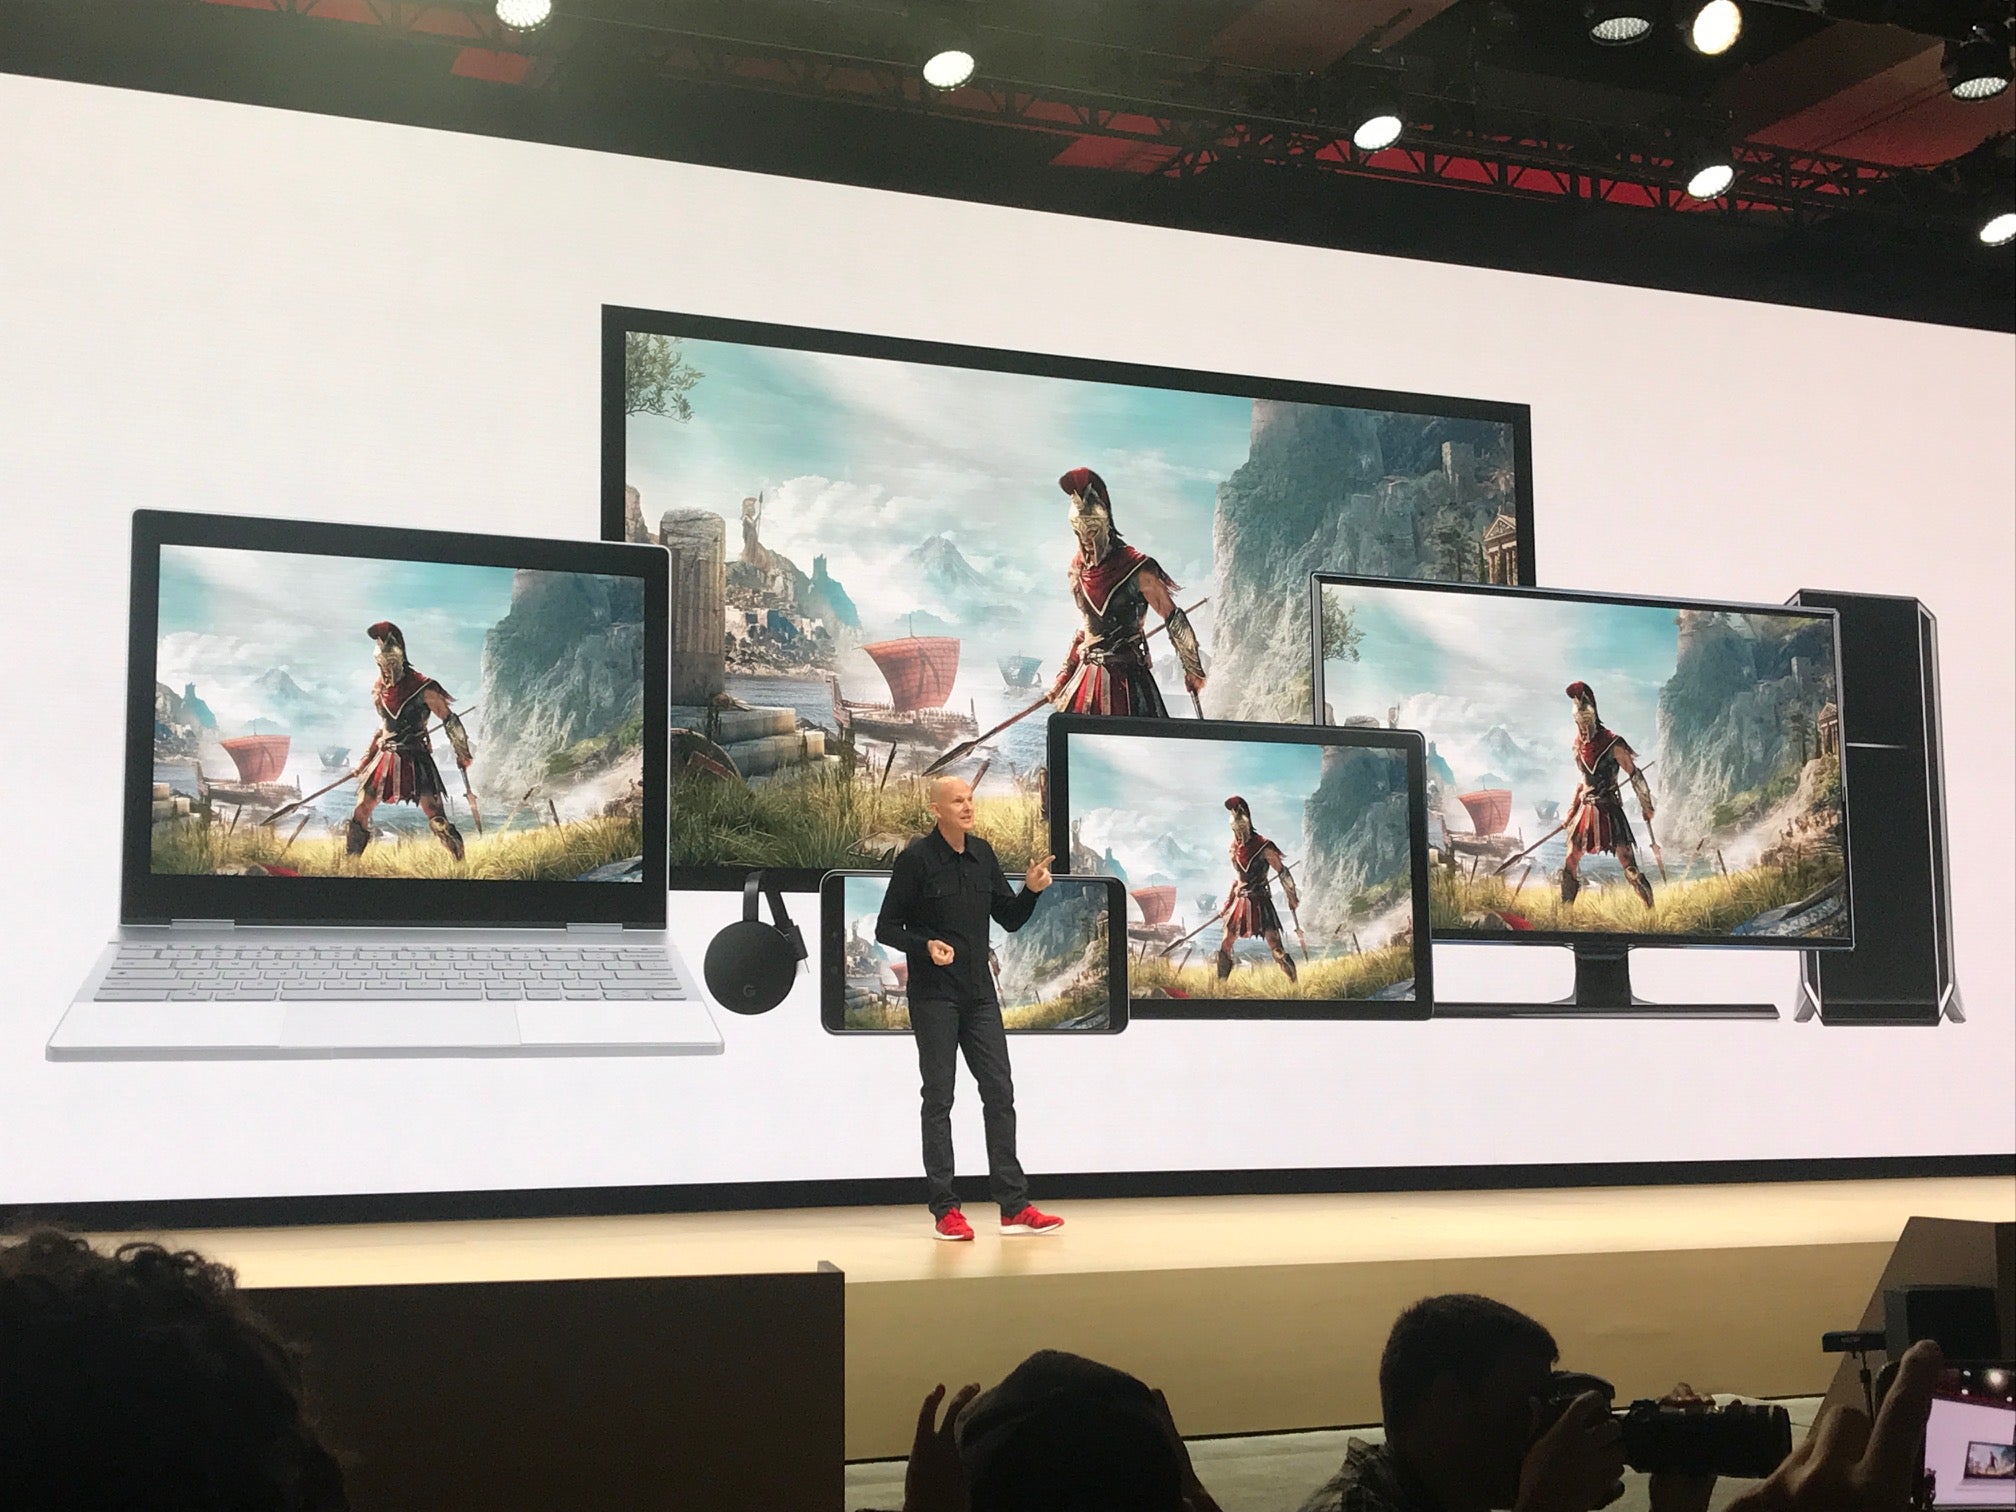 Image for Google: We're "committed to protecting and respecting privacy" with Stadia